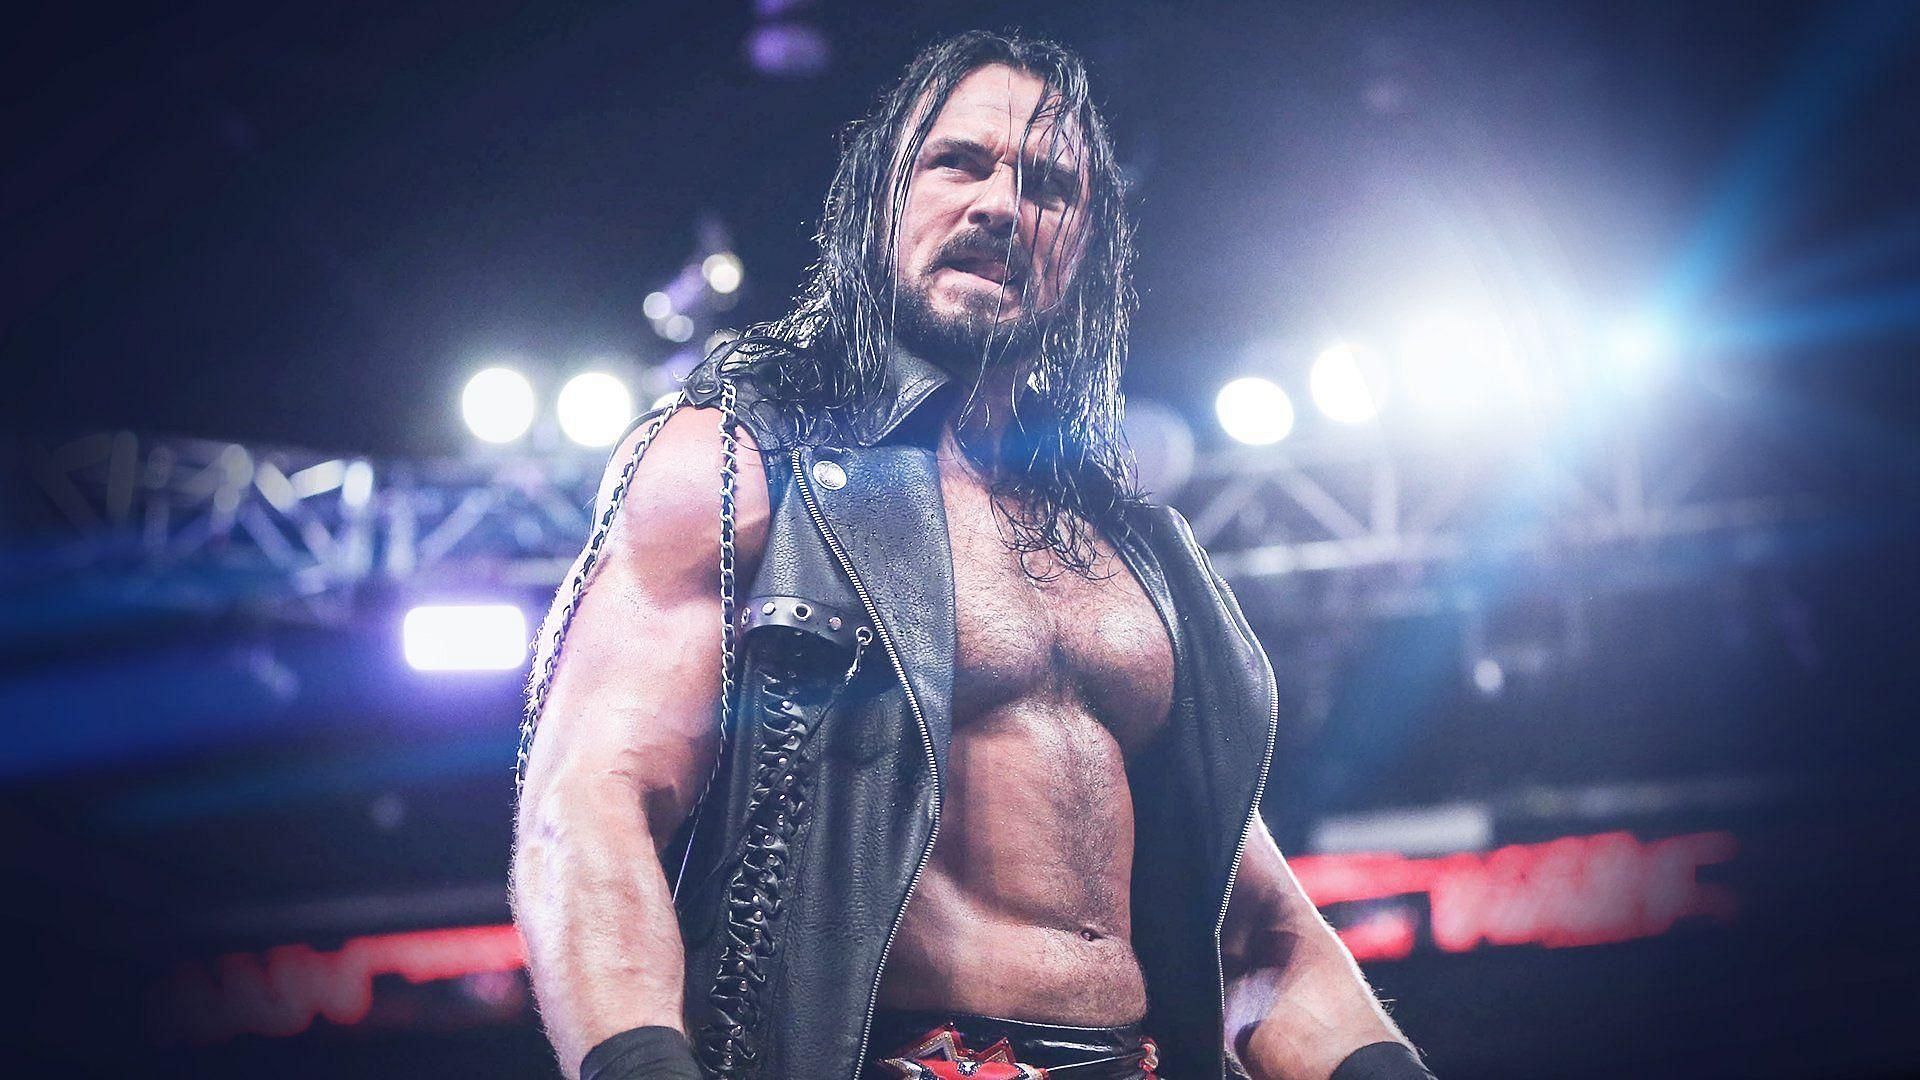 Drew McIntyre considers Randy Orton as one of the greatest of all time